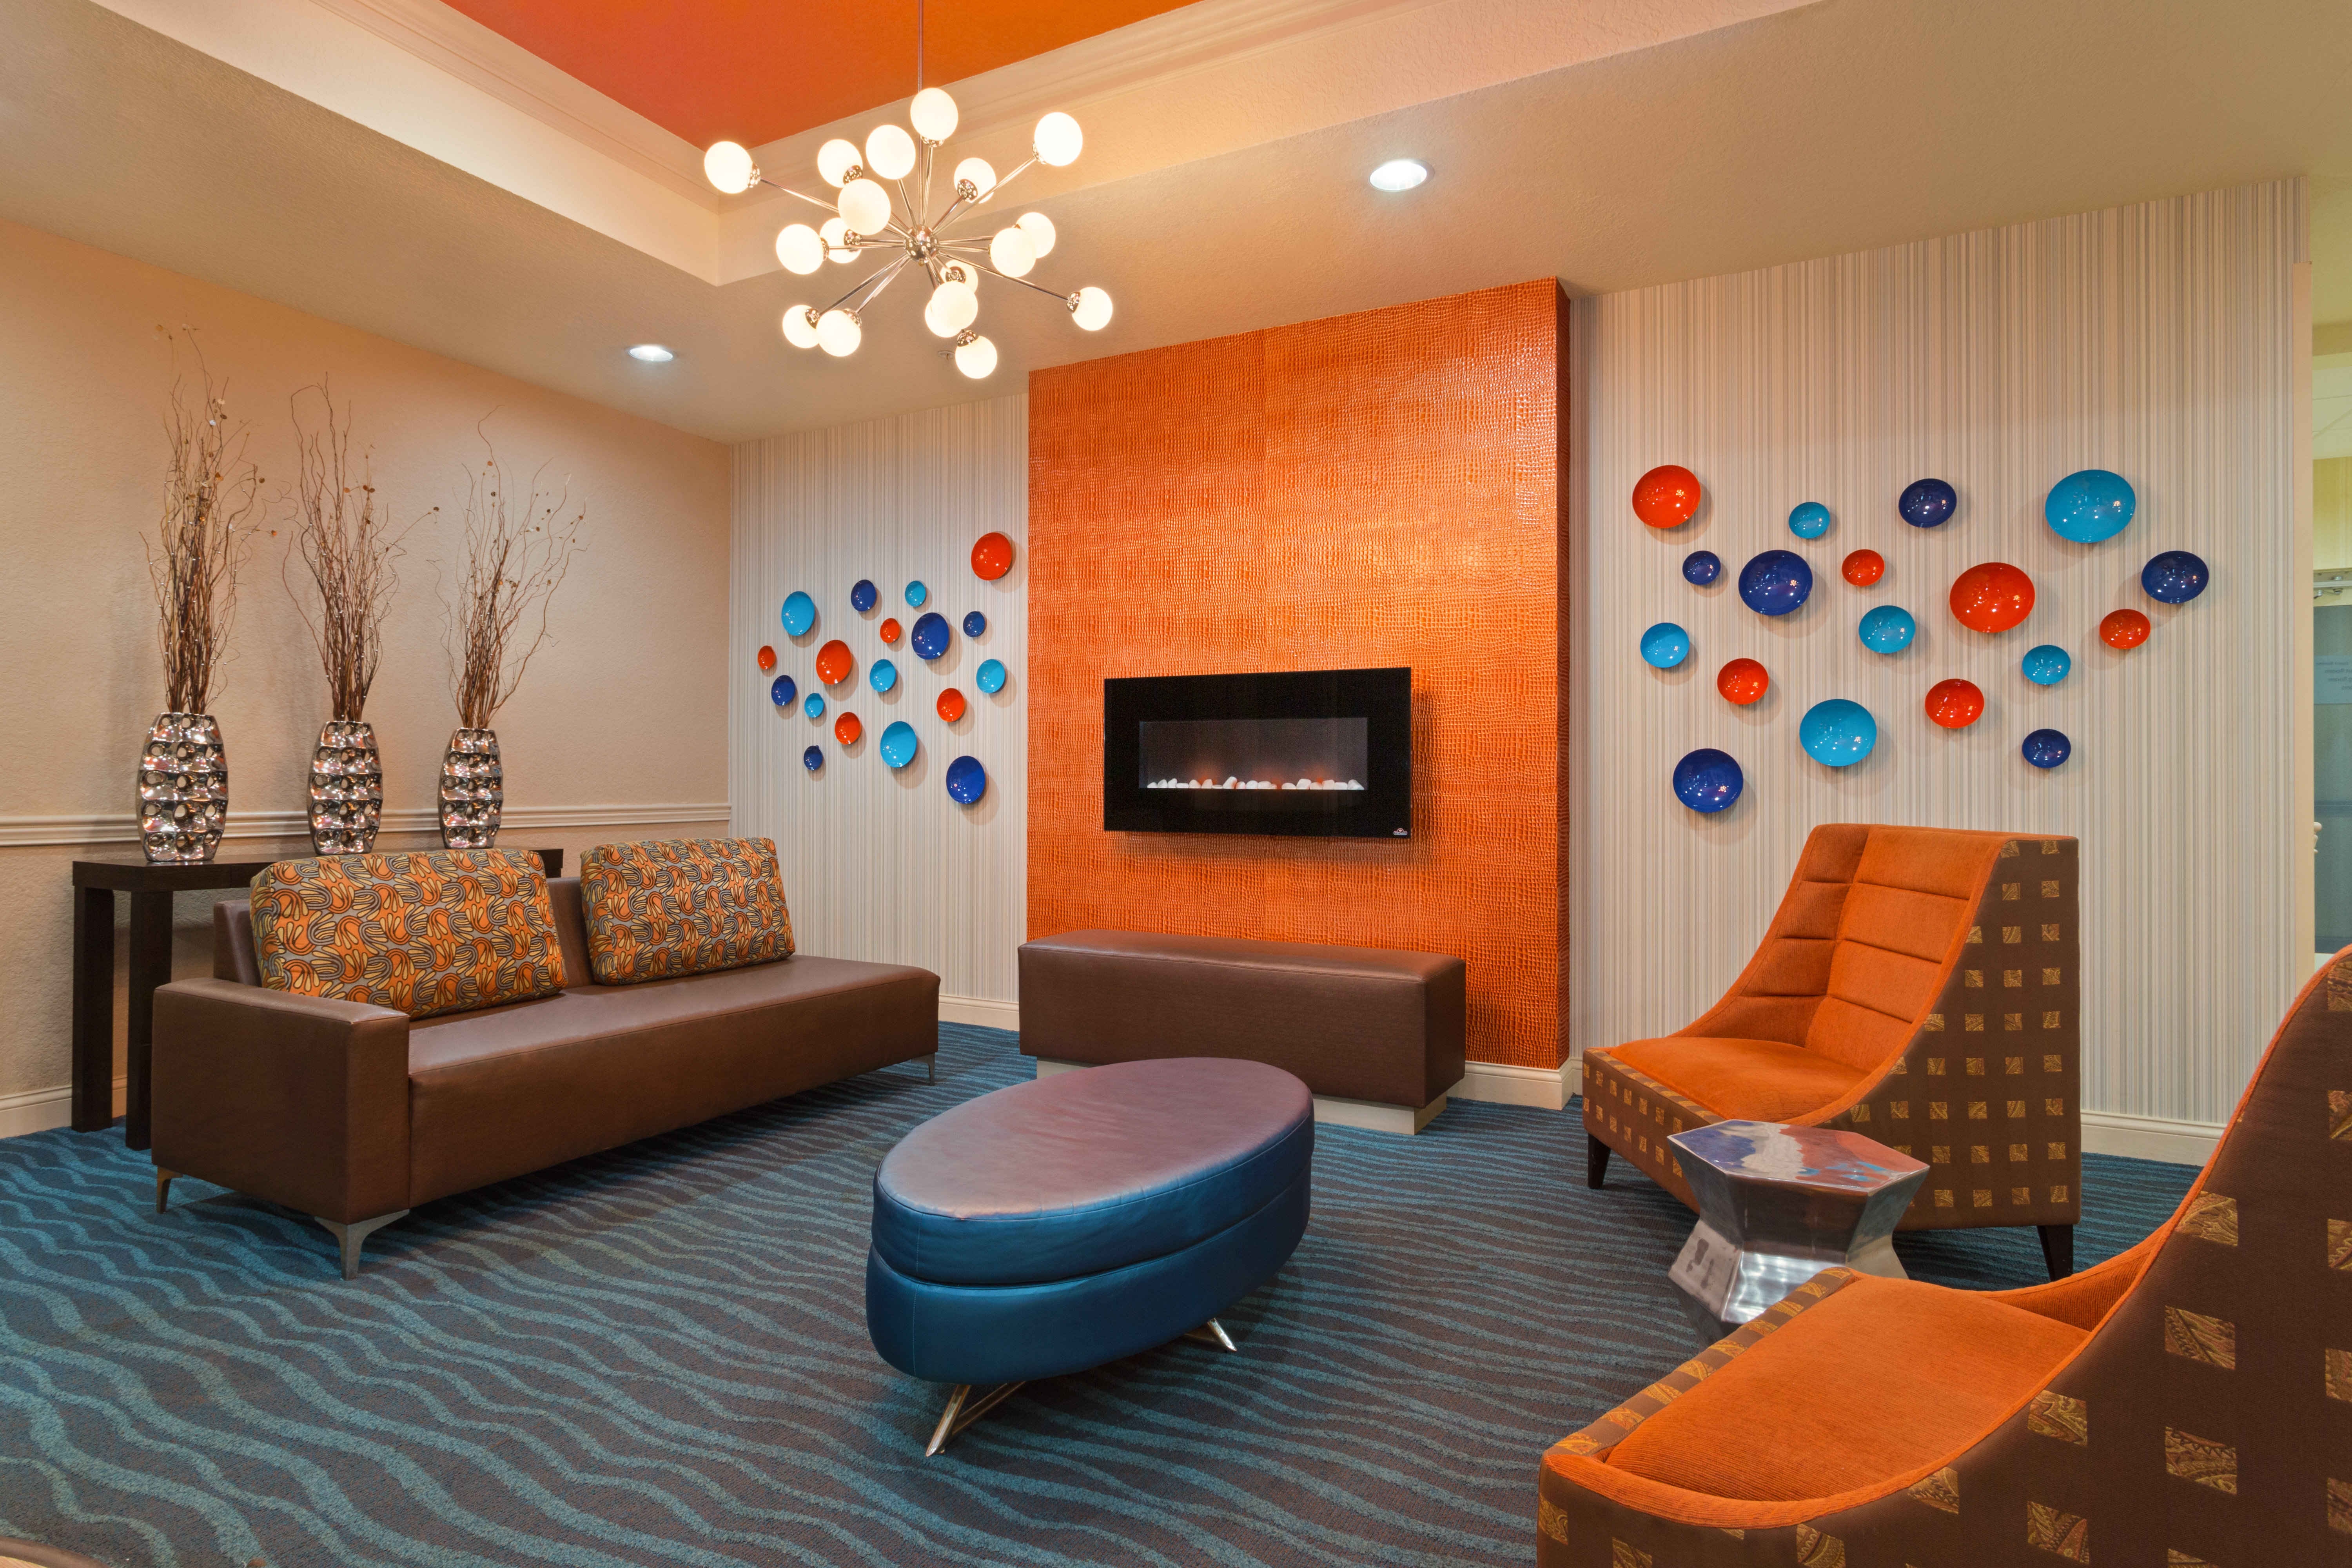 Our trendy lobby will be sure to brighten your day!